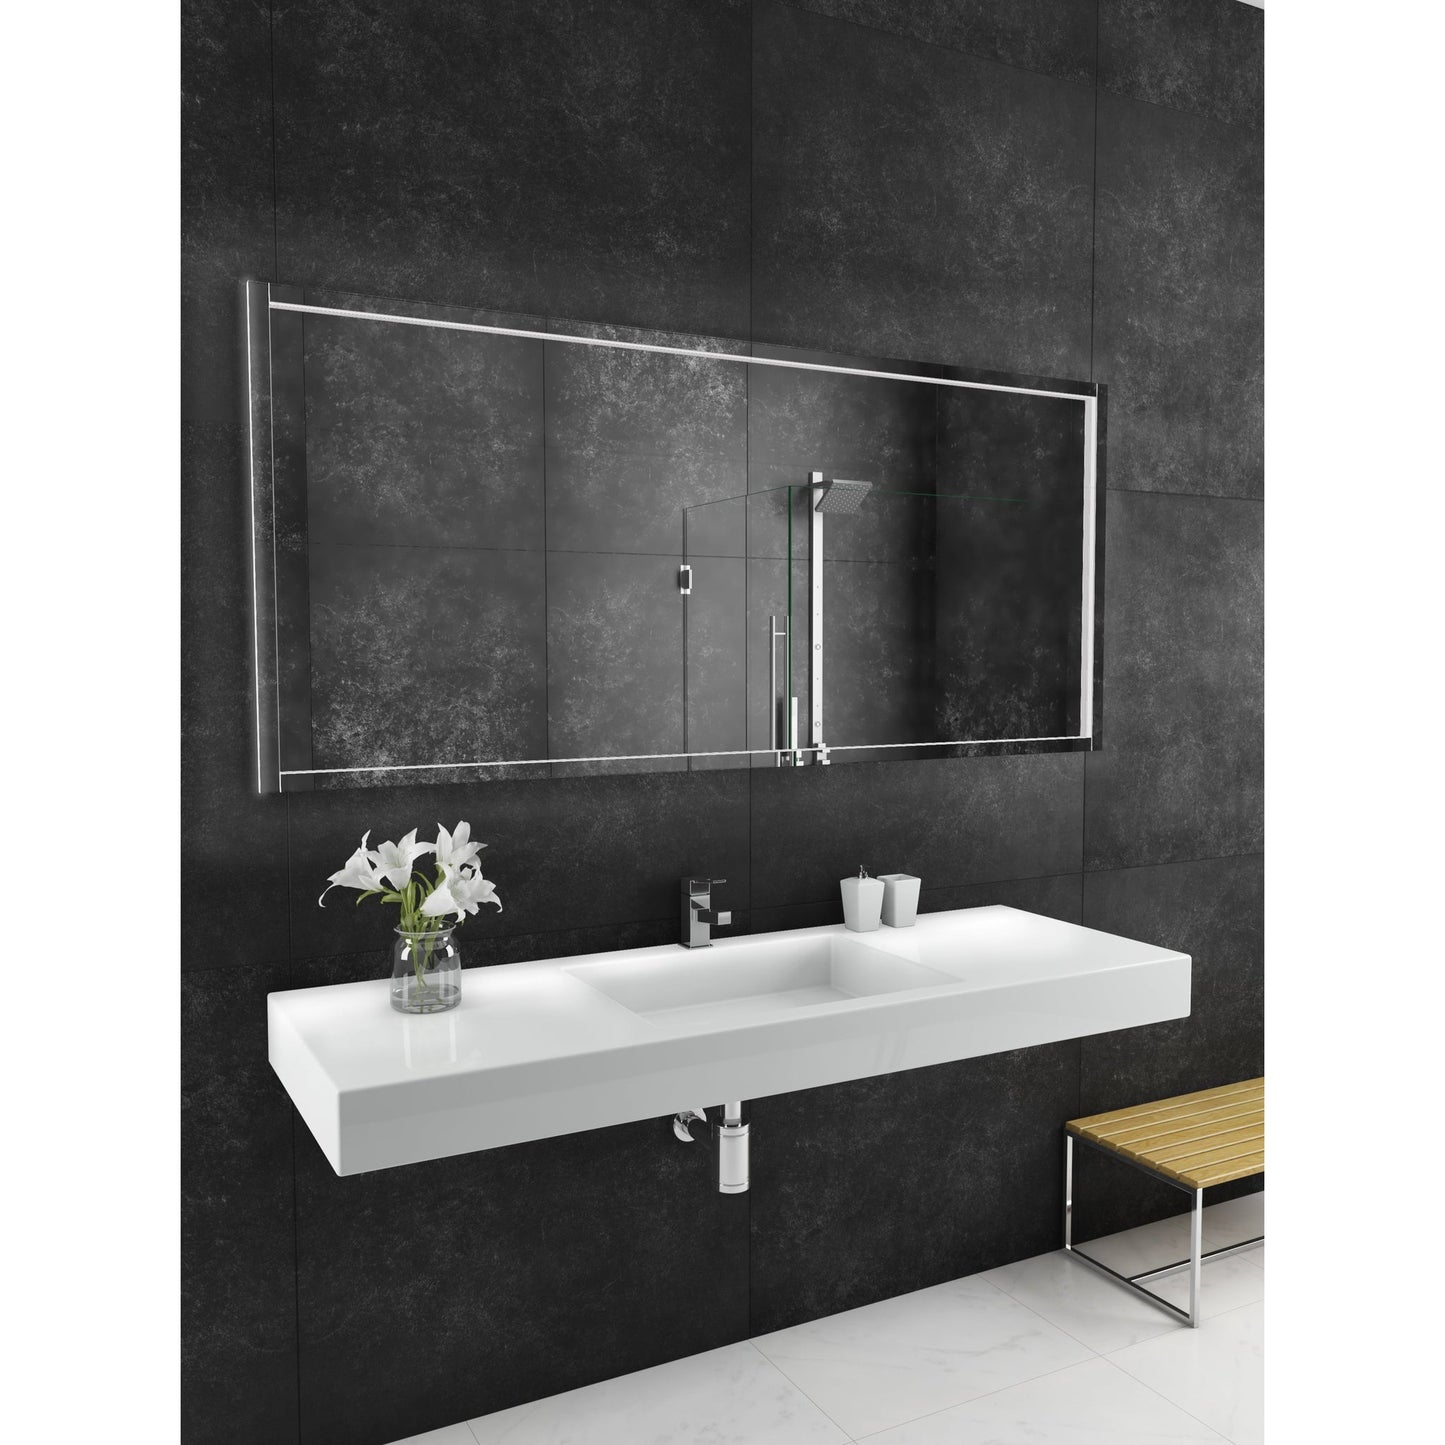 Paris Mirror Flore 70" x 32" Dual-Lighted Super Bright Dimmable Wall-Mounted 3000K LED Mirror With Embossed Glass 3D Design